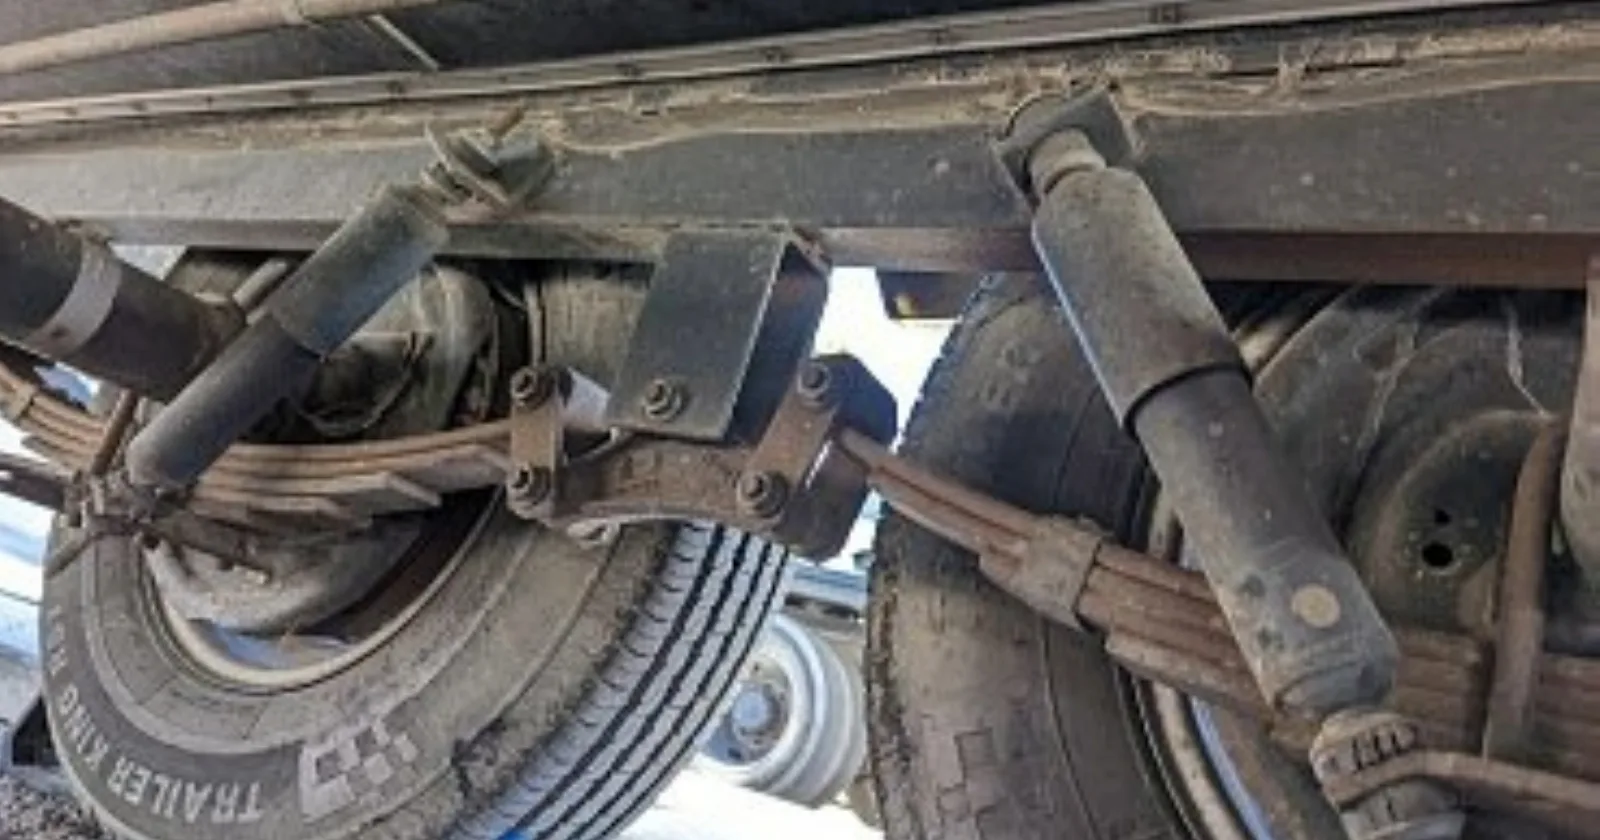 RV suspension system including the leaf springs, shocks and tires